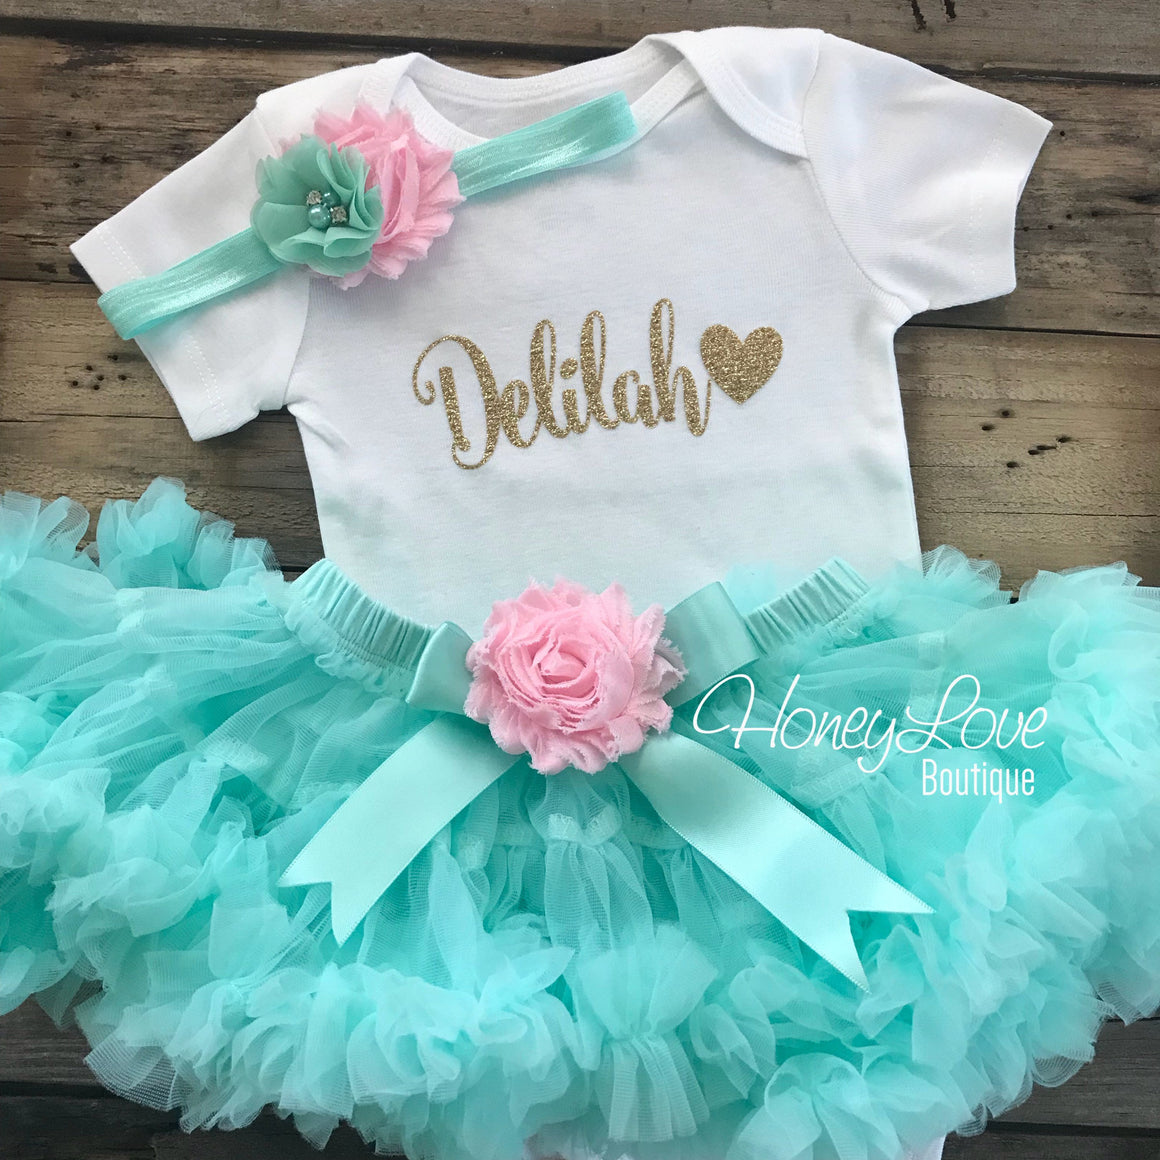 PERSONALIZED Name Outfit - Mint/Aqua and Gold Glitter - Light Pink shabby flower embellished pettiskirt - HoneyLoveBoutique